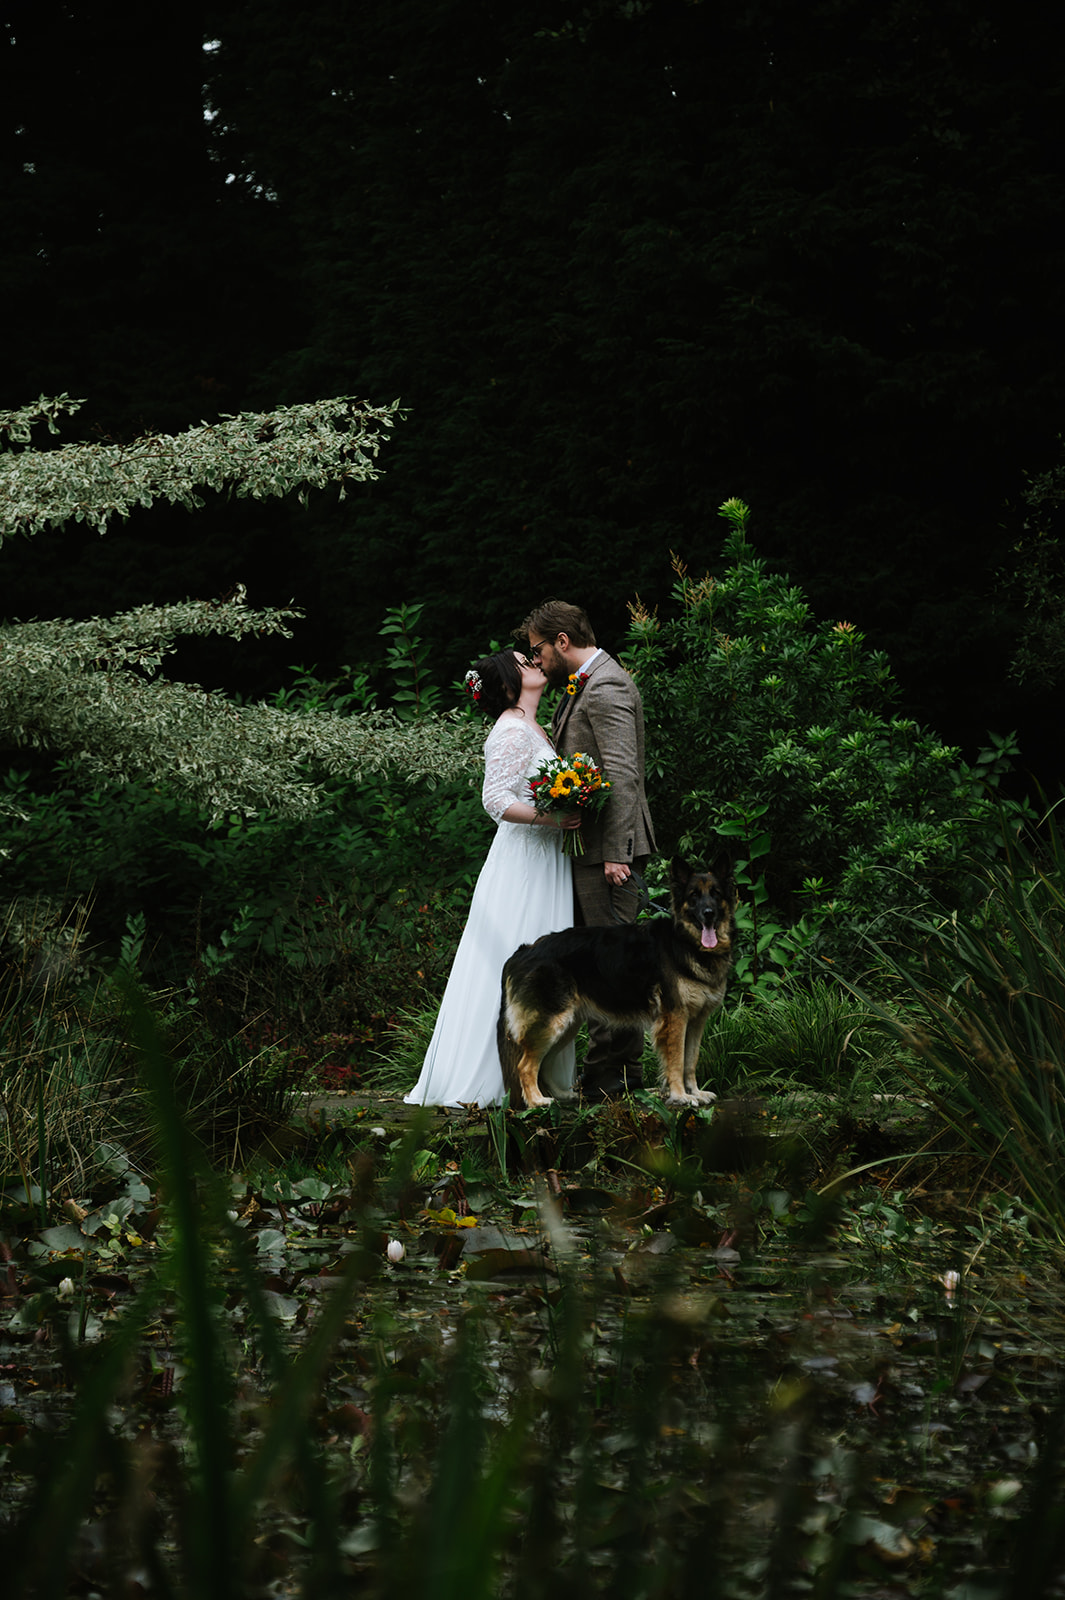 The bride and groom at their Whirlowbrook Hall wedding in Sheffield, with their dog.